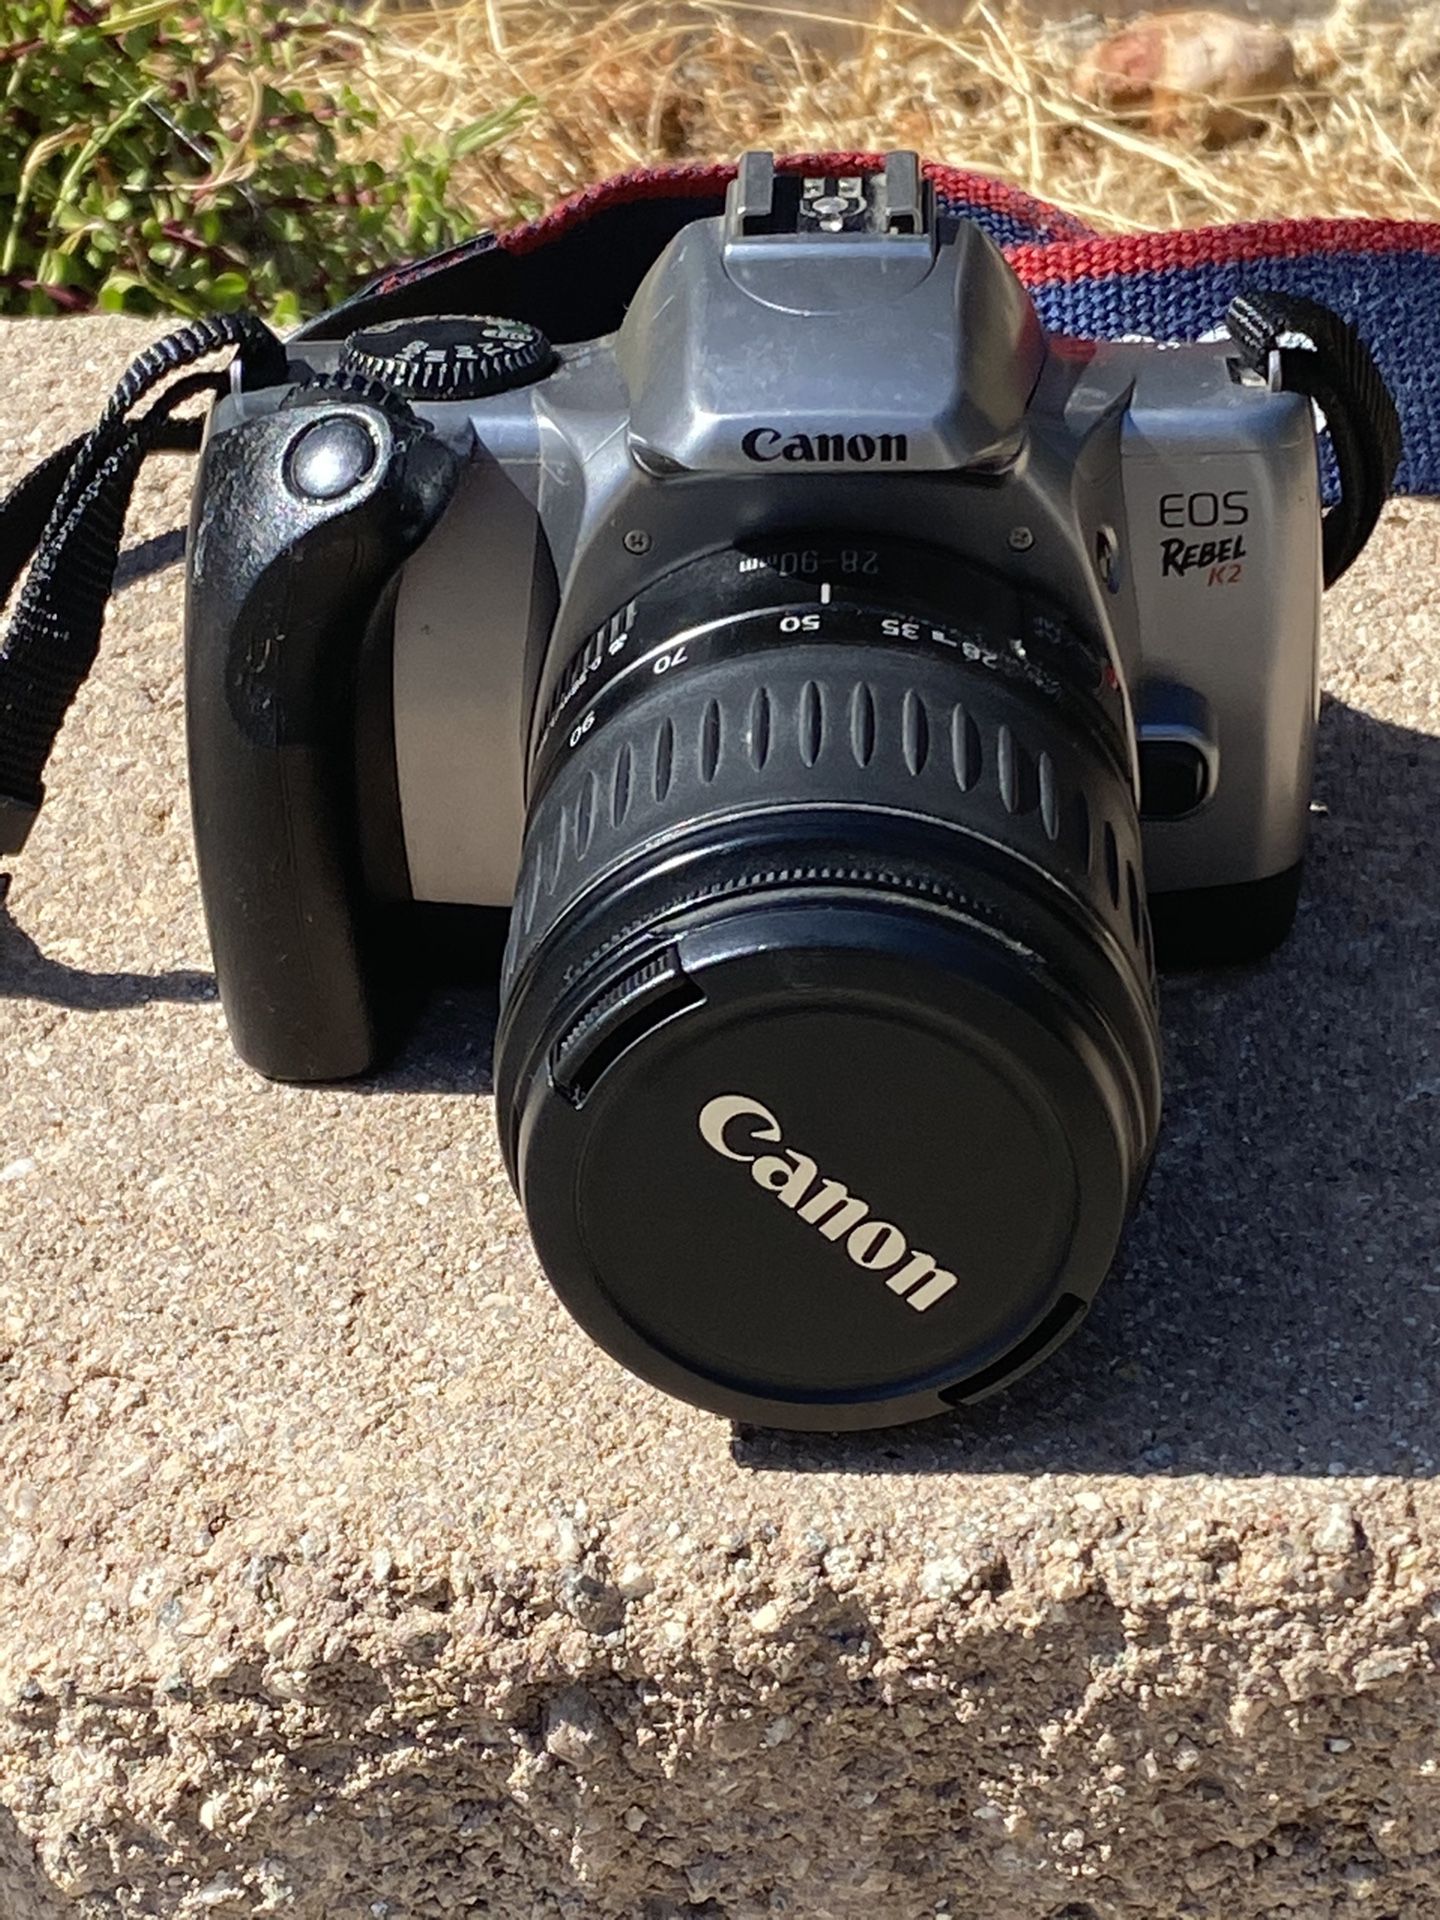 Canon EOS Rebel K2 Film Camera with 28-90mm Lens and Strap